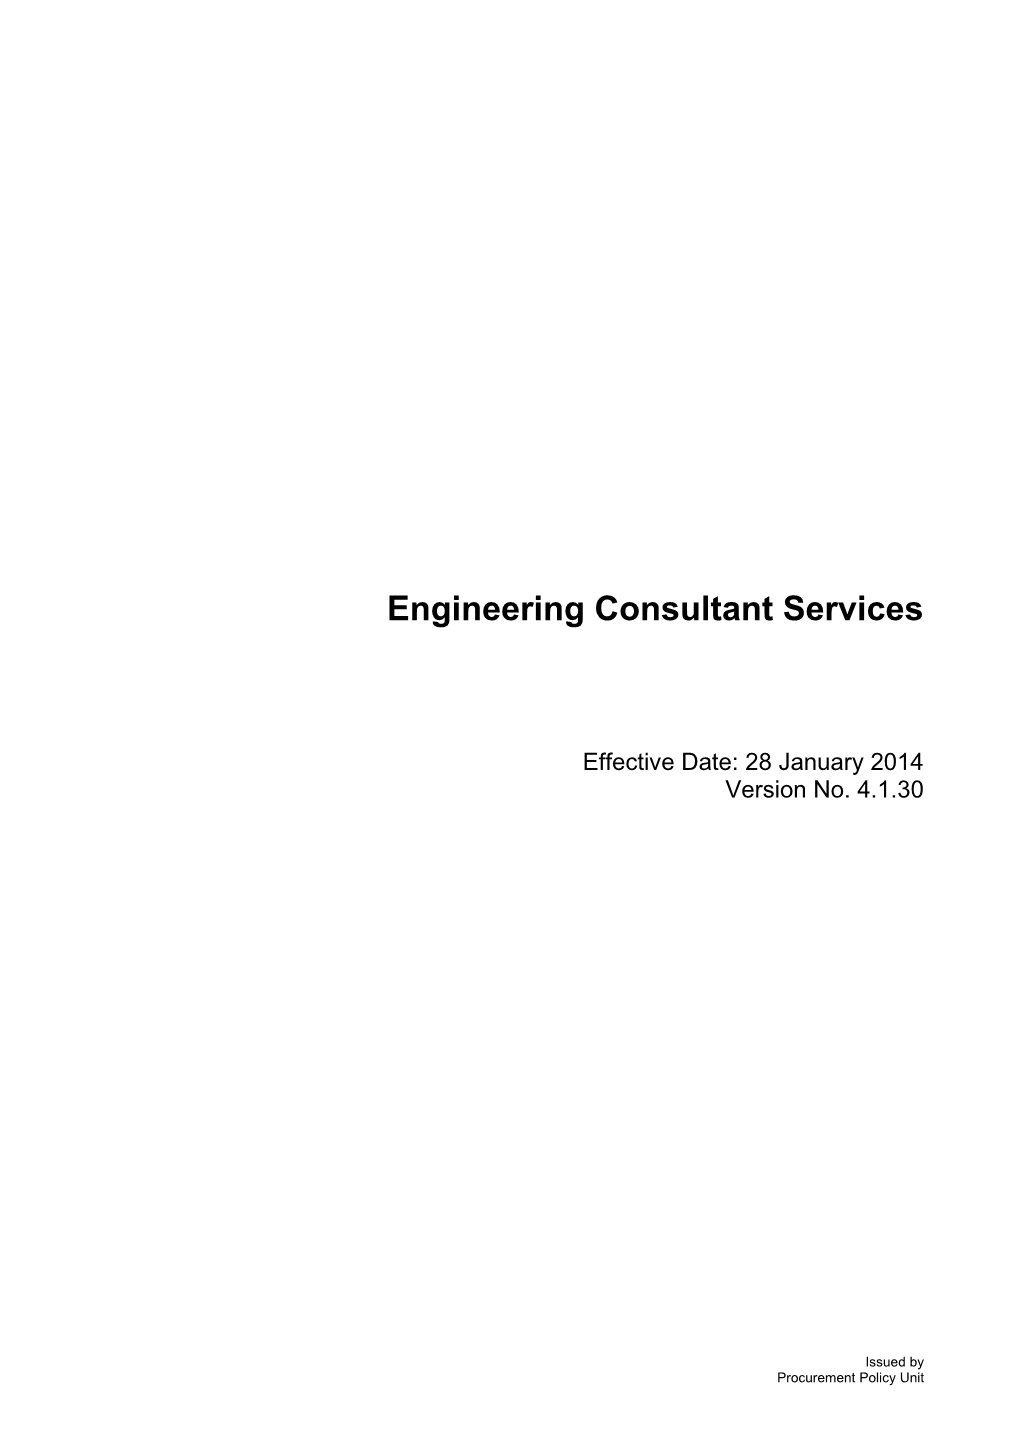 Engineering Consultant Services - V 4.1.30 (28 January 2014)